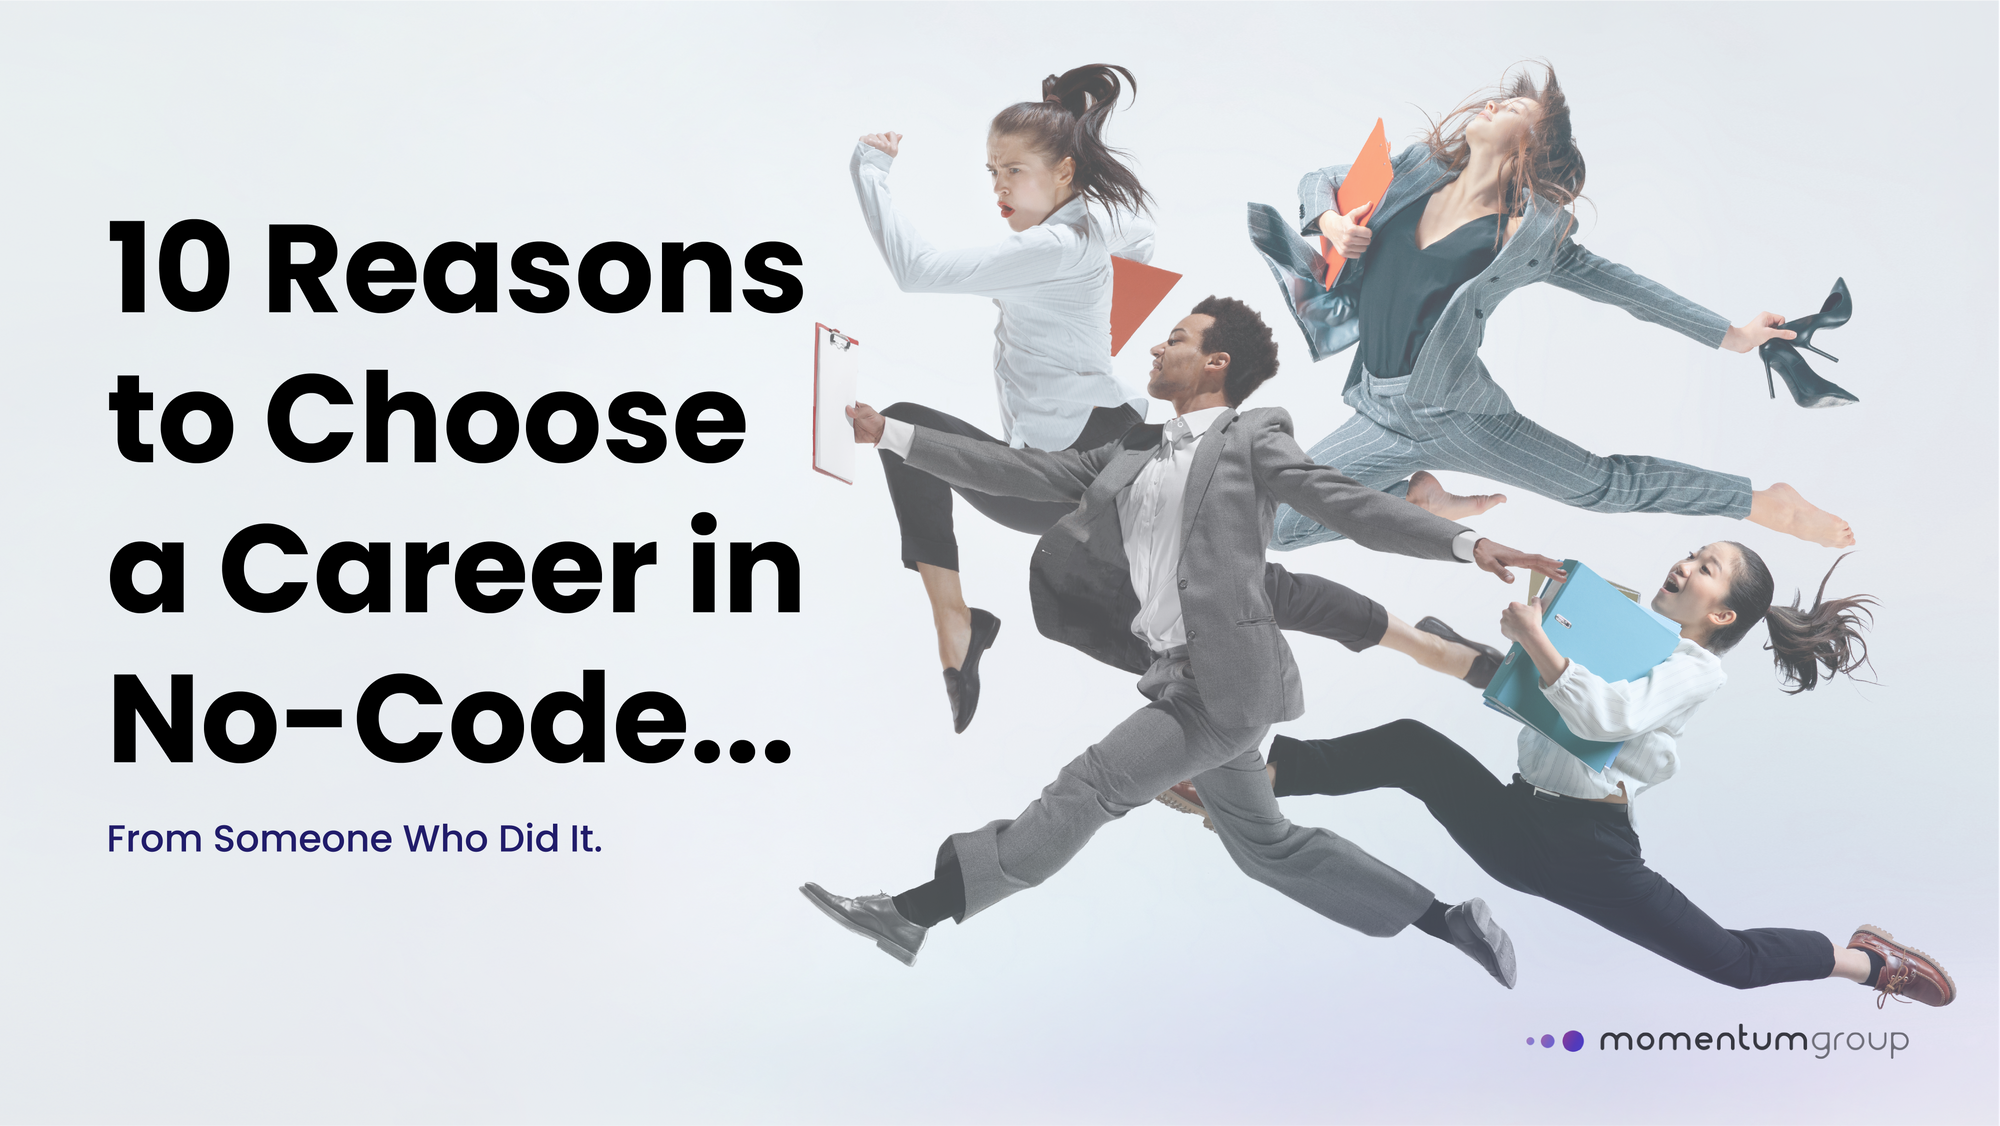 10 Reasons to Choose a Career in No-Code